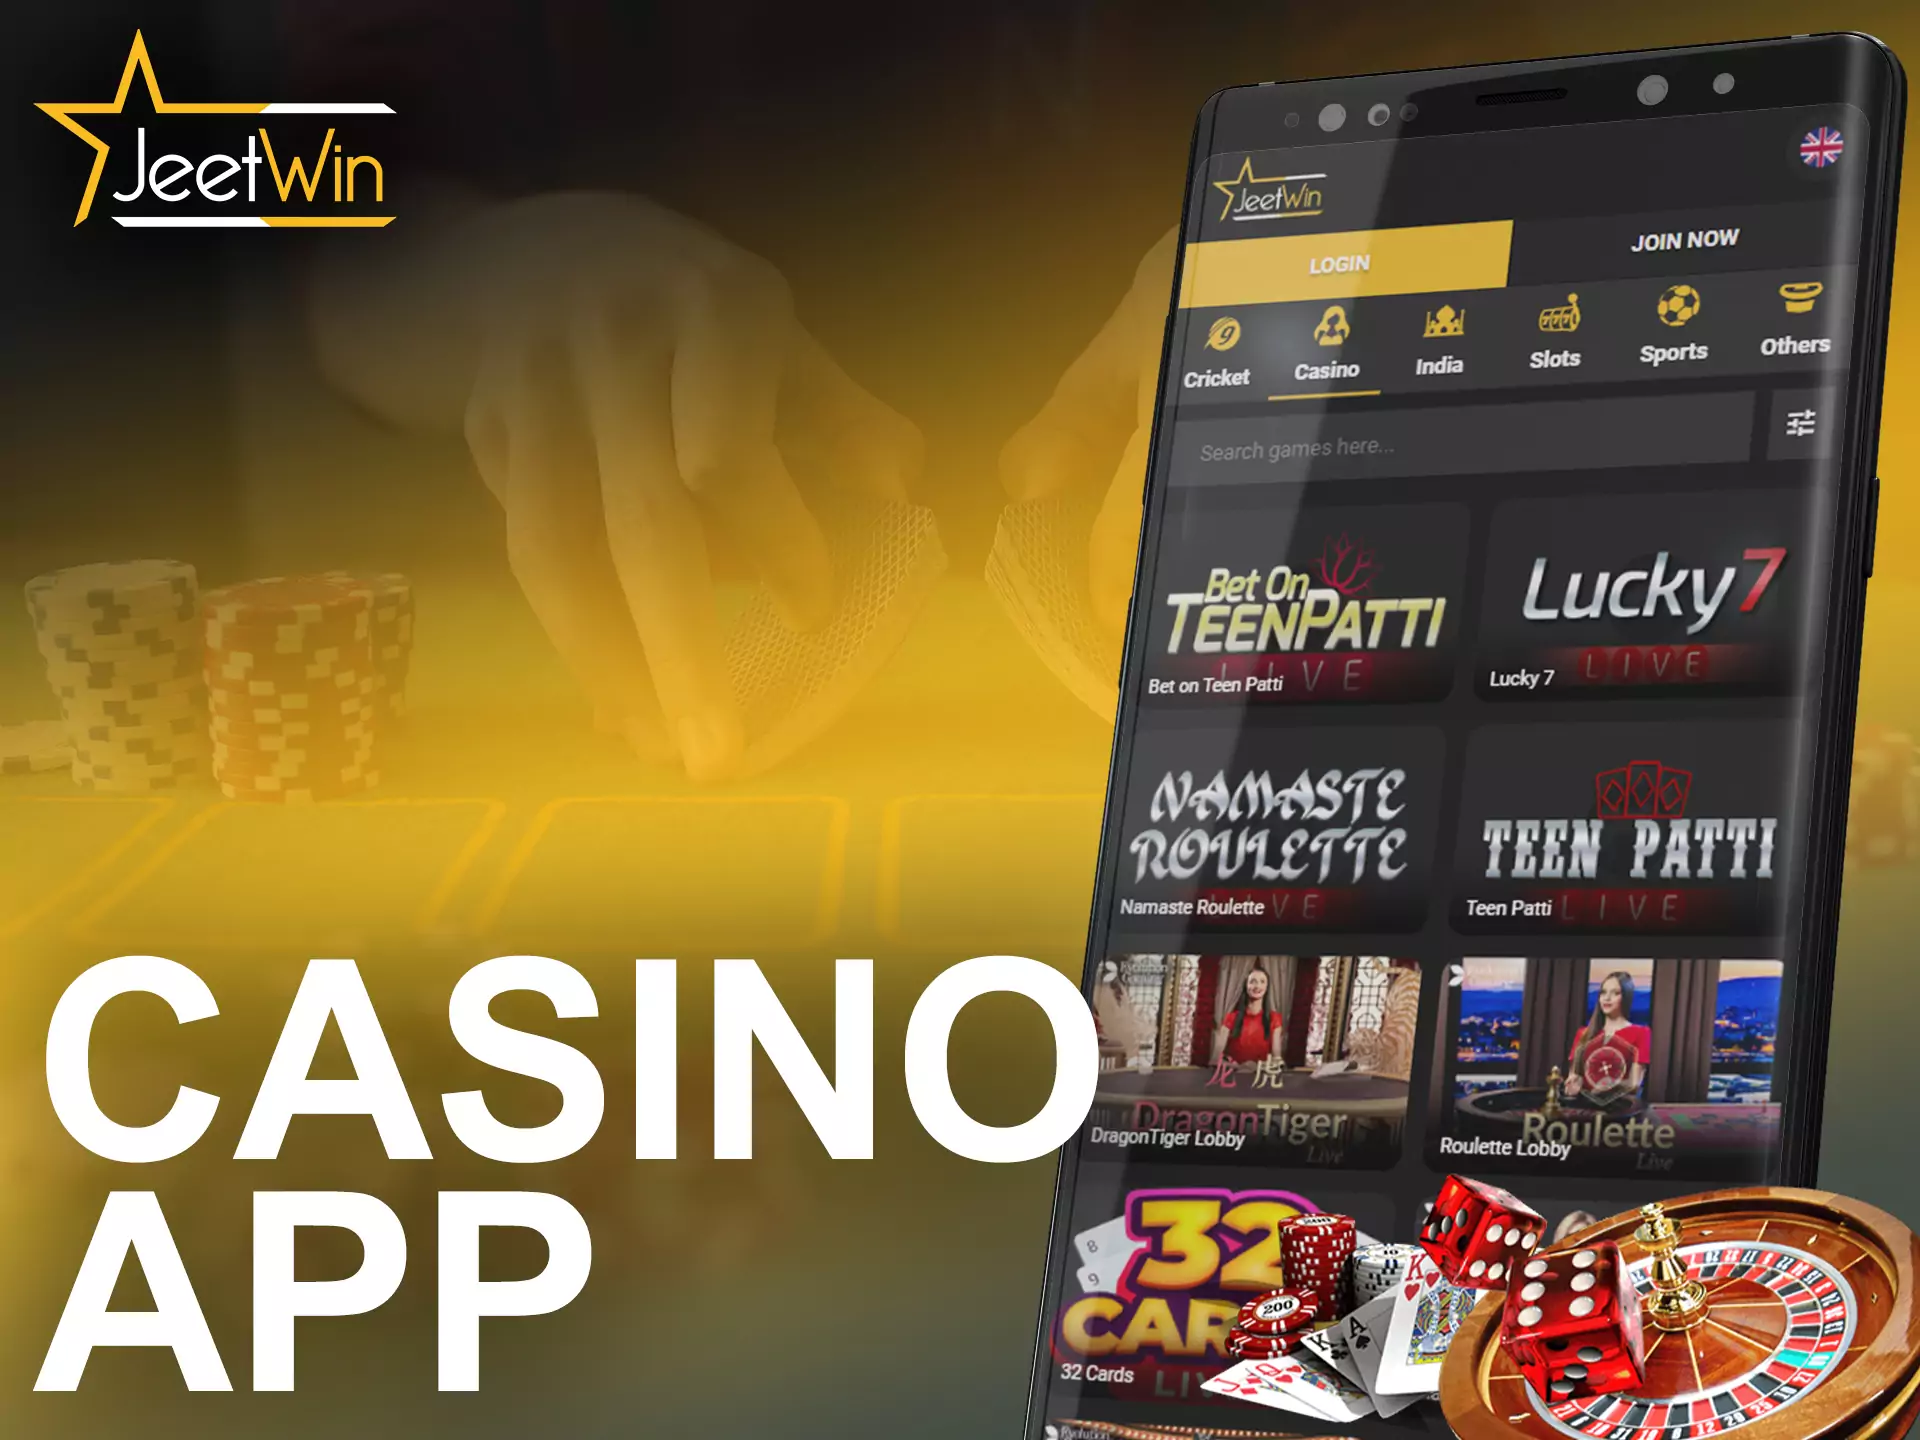 Play different games at JeetWin Casino using the app.